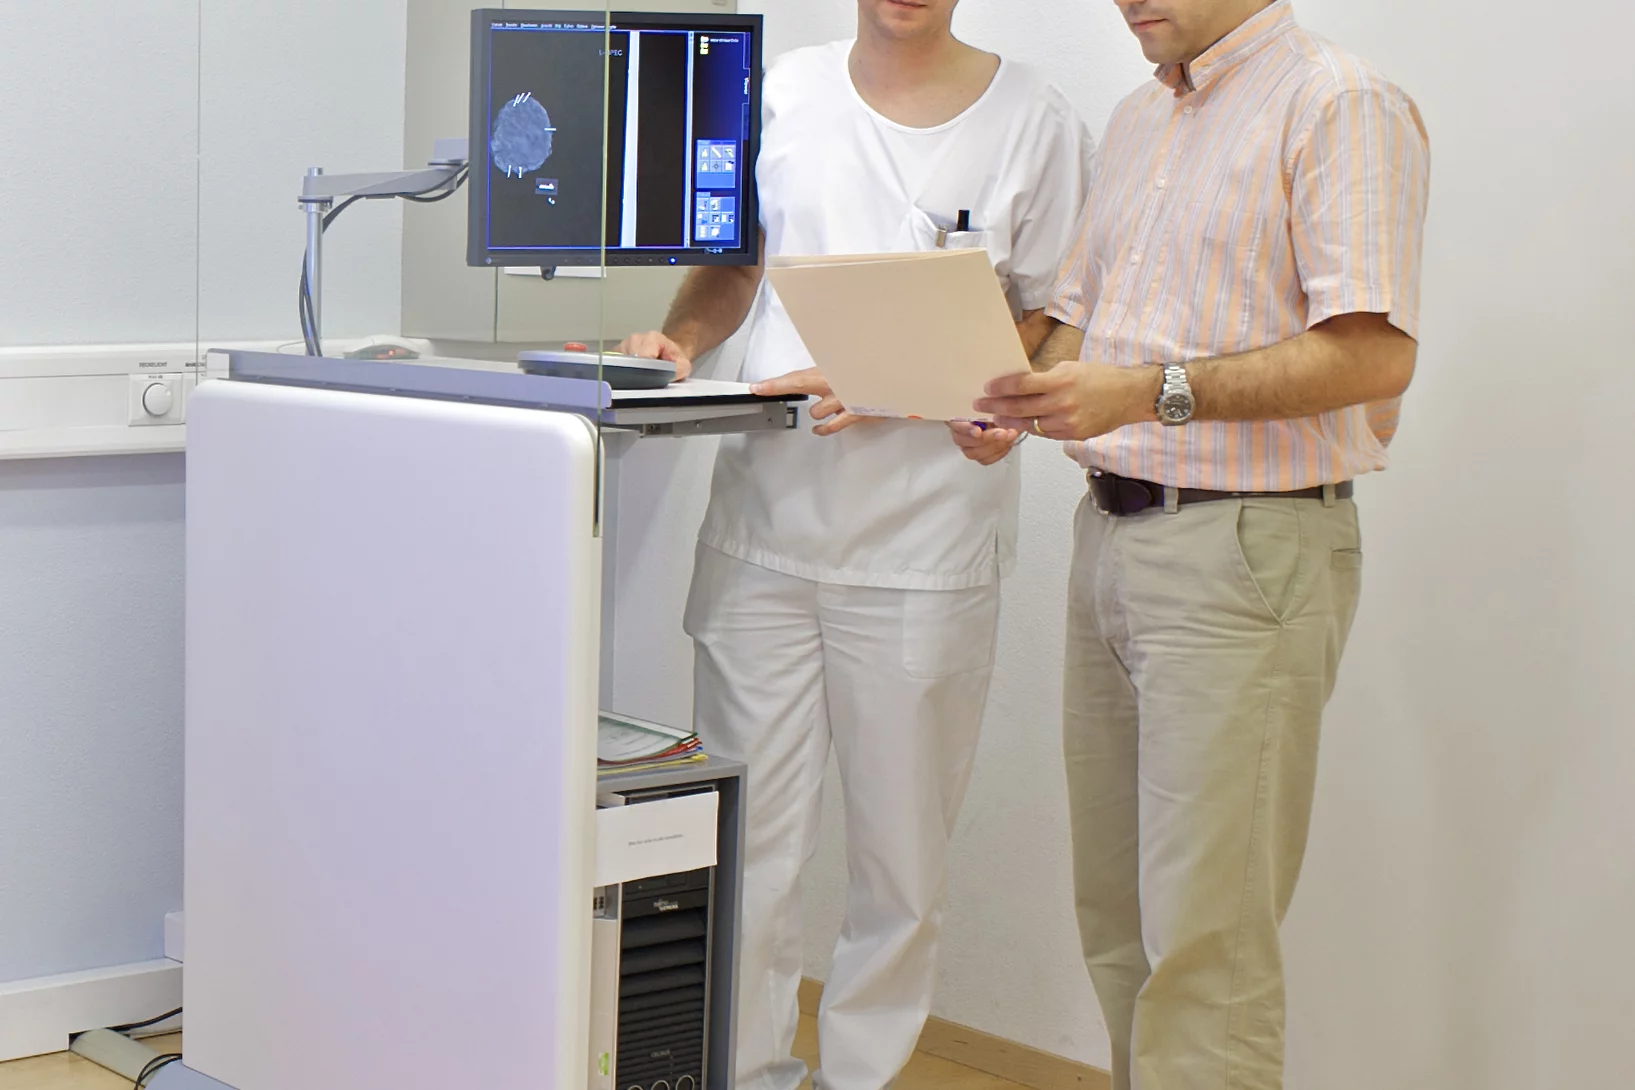 Dr. Nik Hauser and Prof. M. Stampanoni discuss results in the mammography room at Kantonsspital Baden. (PSI/M.Fischer)